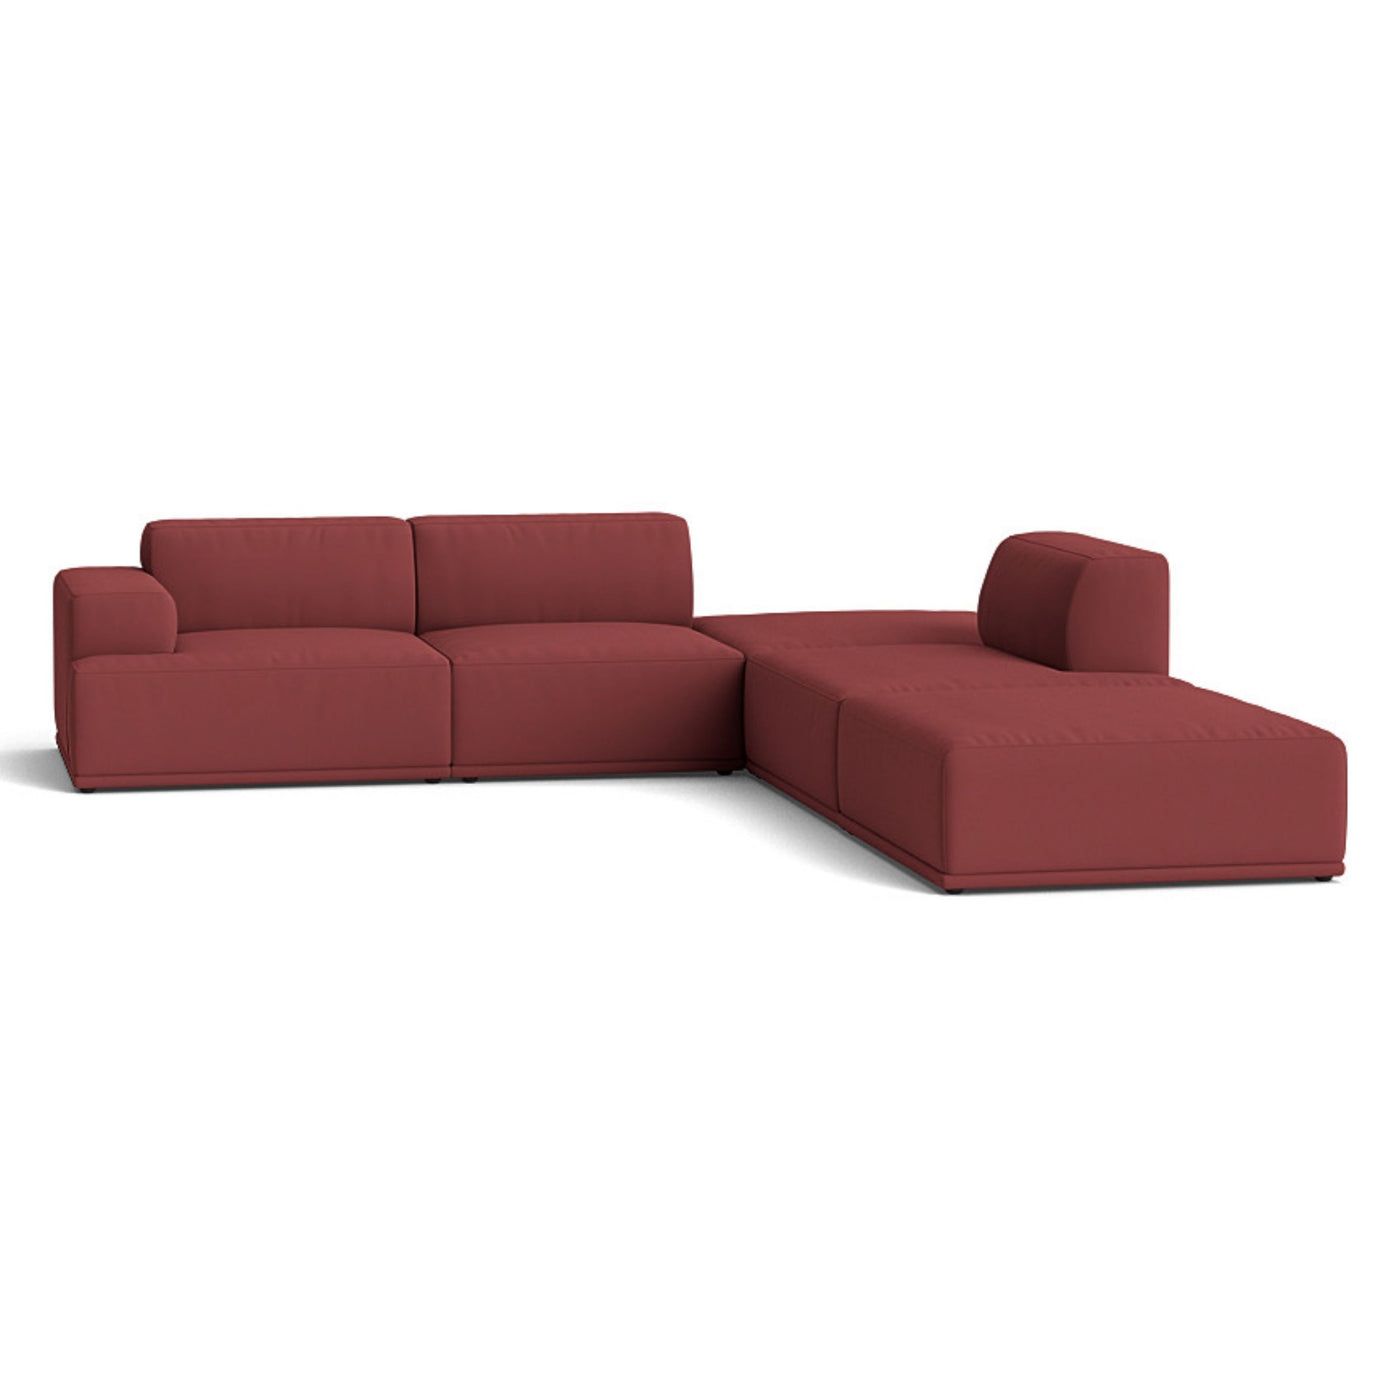 Muuto Connect Soft Modular Corner Sofa, configuration 3. made-to-order from someday designs. #colour_rime-591